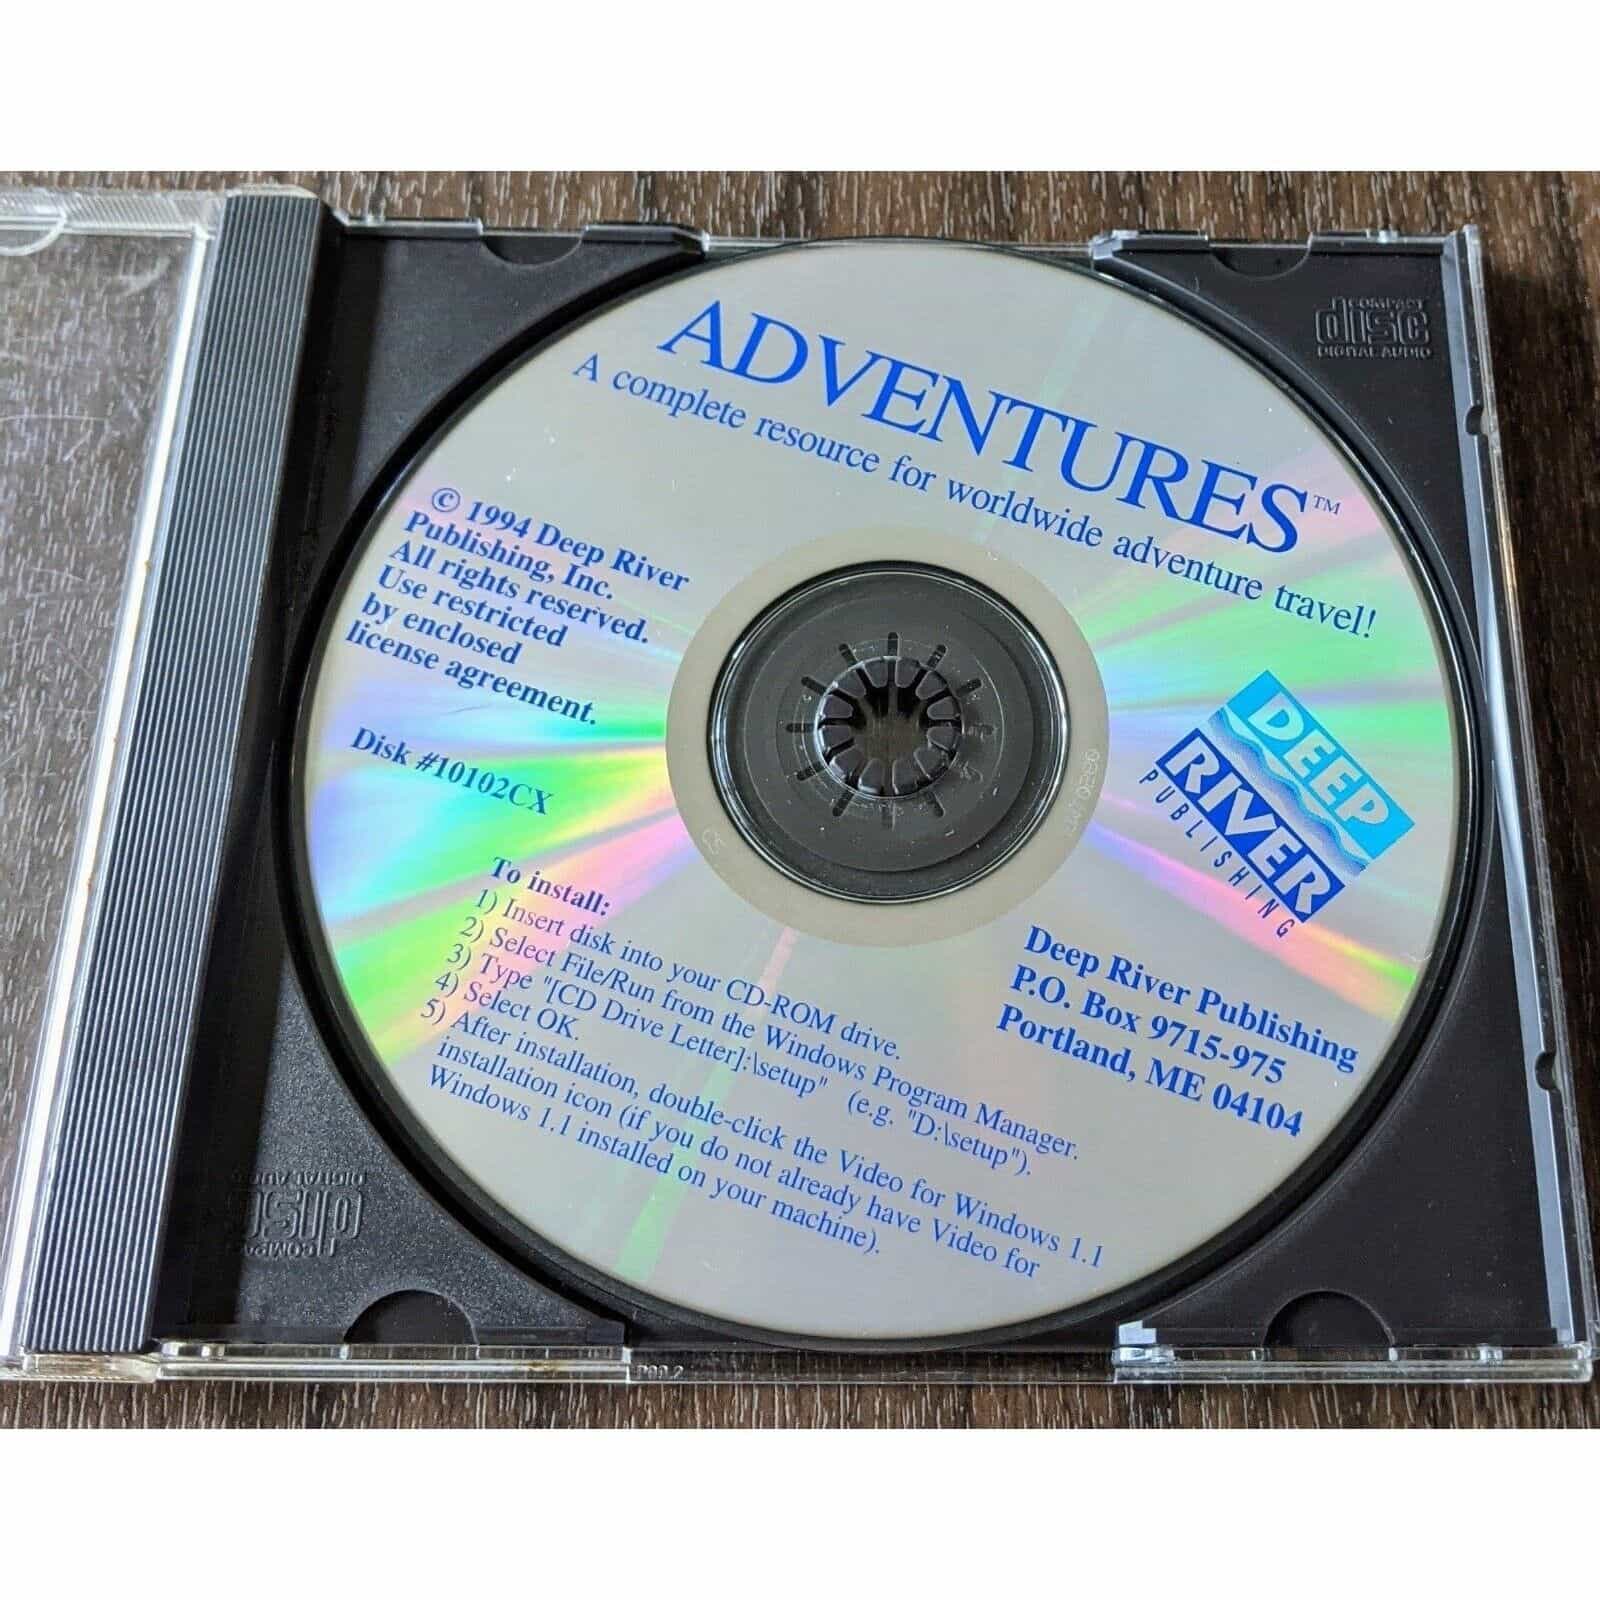 Adventures by Deep River Publishing PC Travel CD